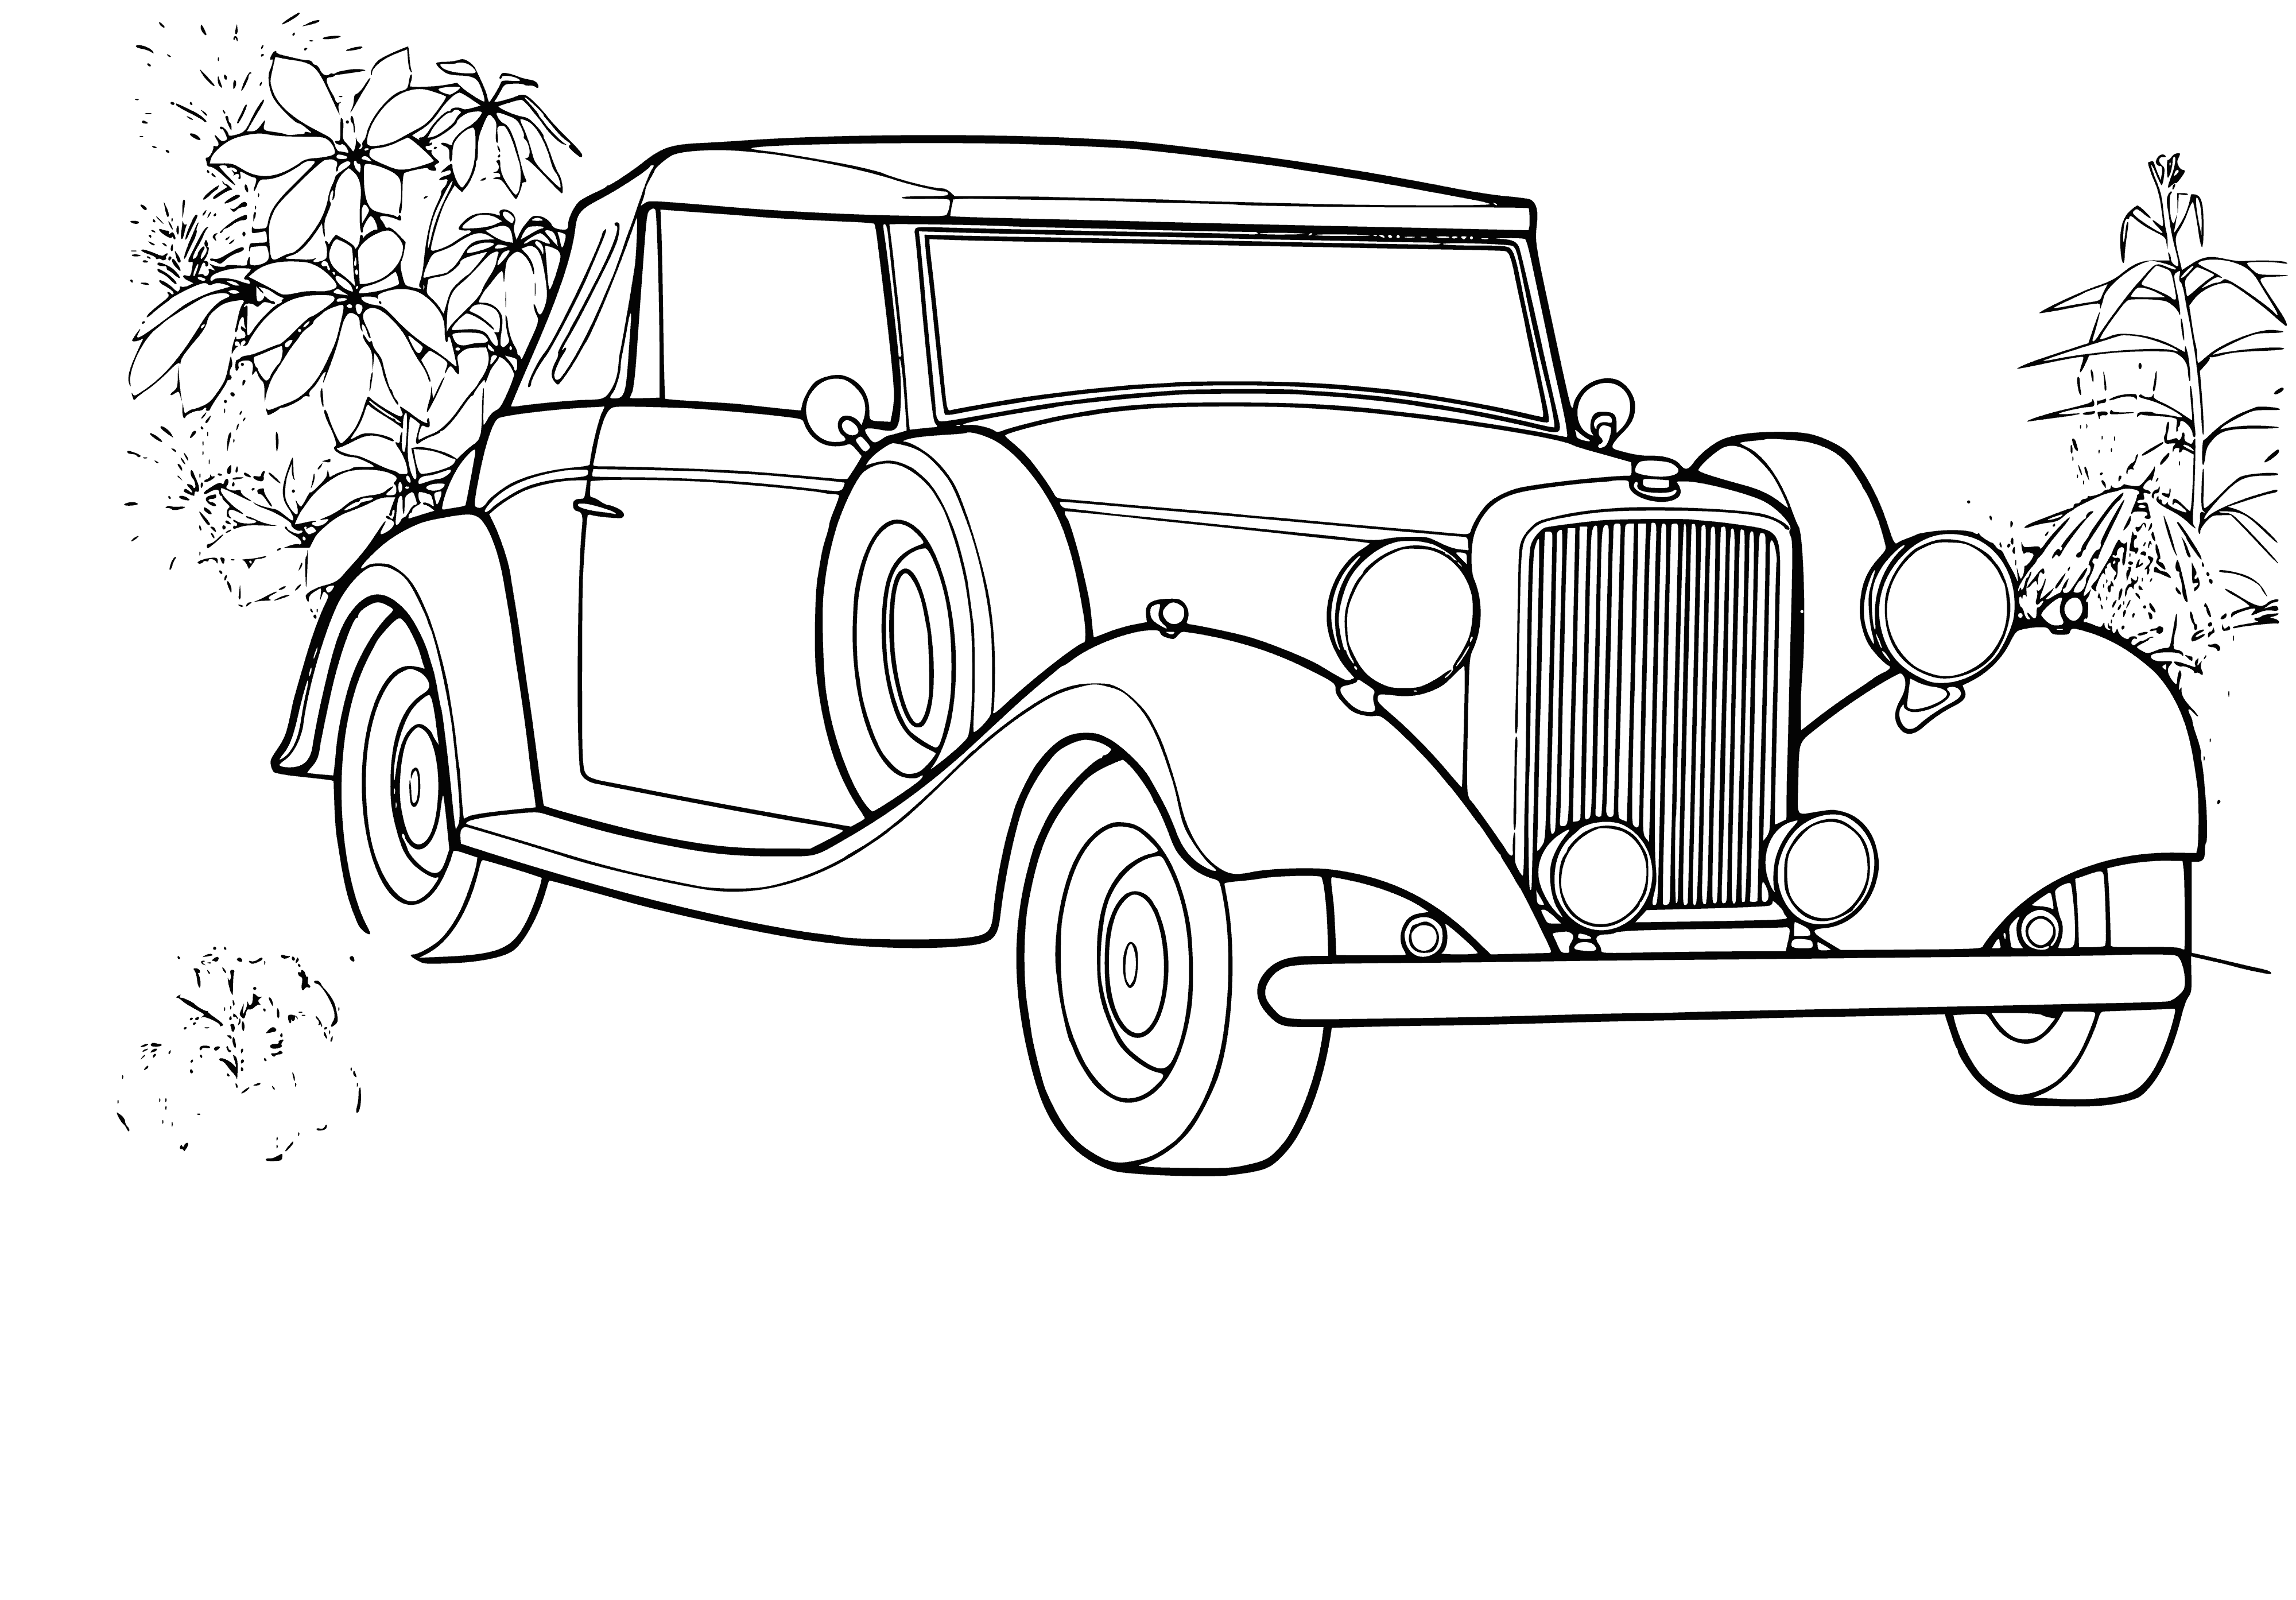 Rolls-Royce Royal coloring page